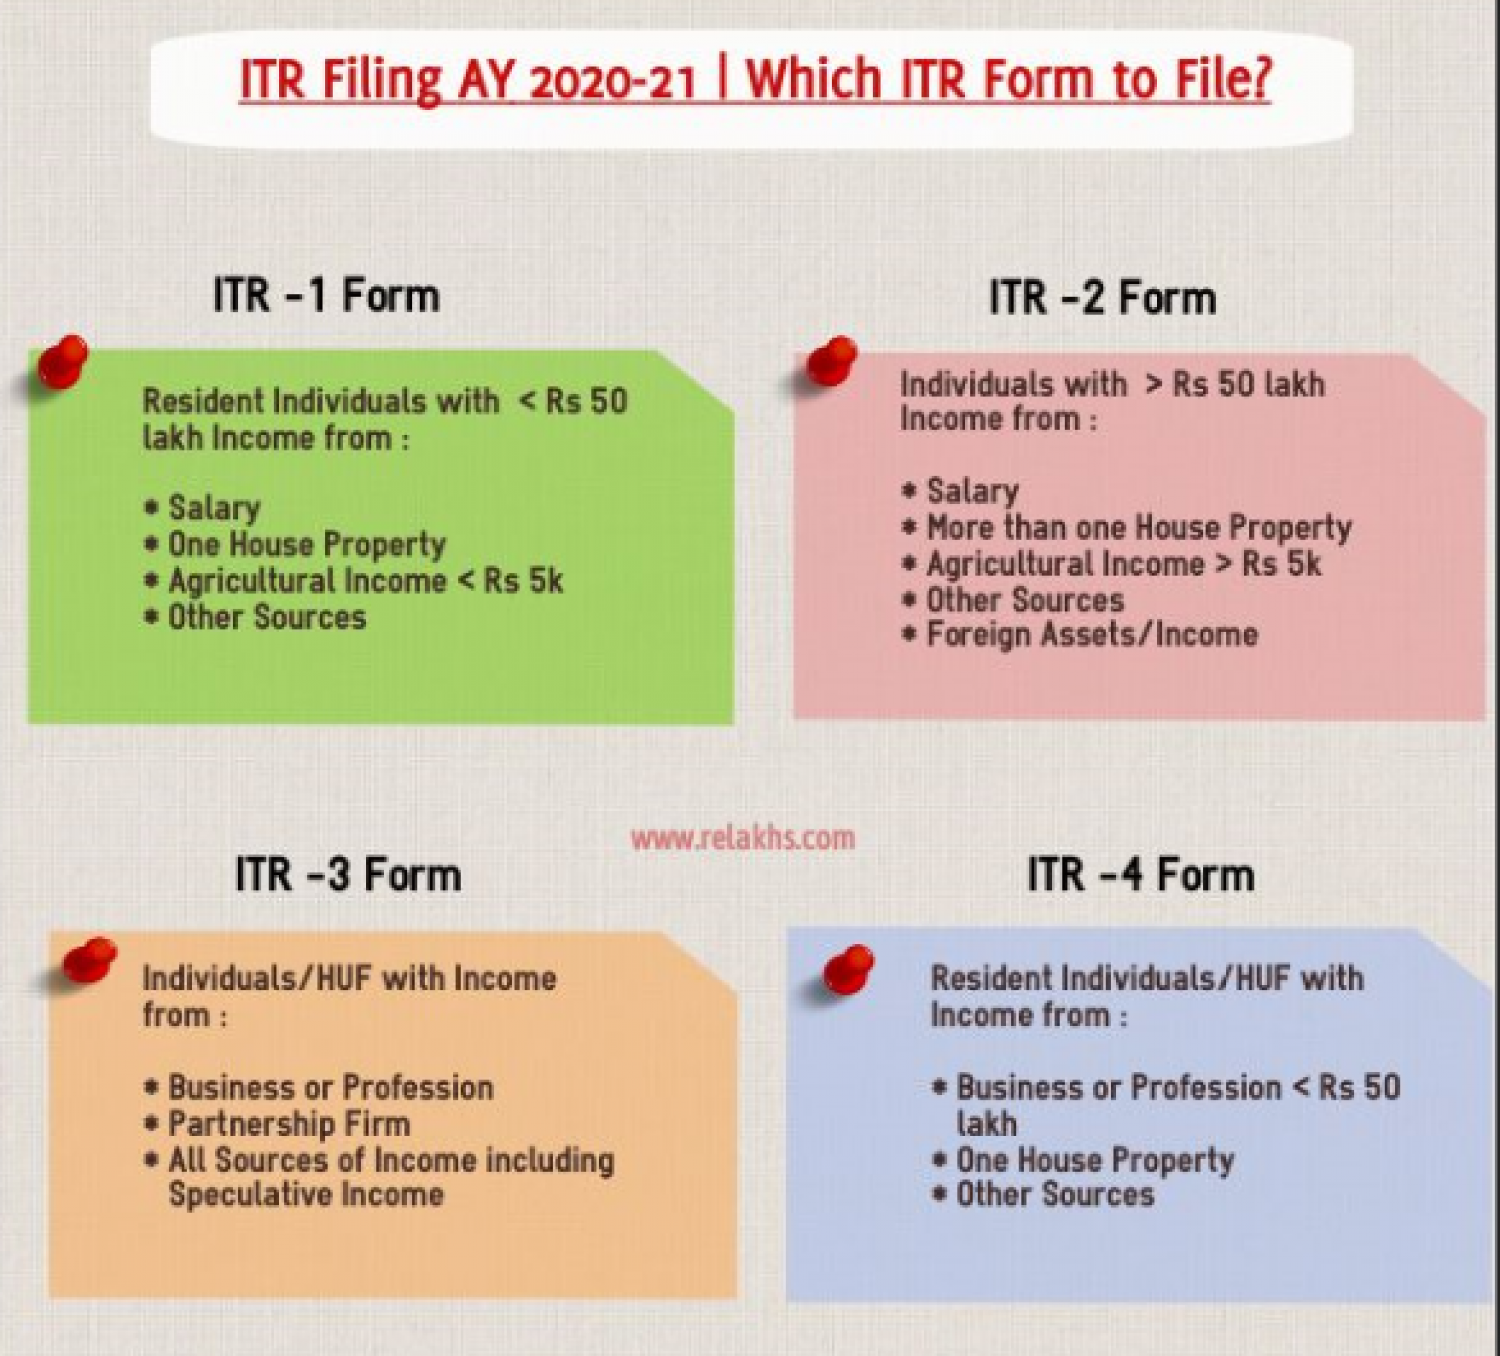 LATEST UPDATE ON INCOME TAX RETURN FORMS FOR FY 2020-21: NEW ITR FORM 